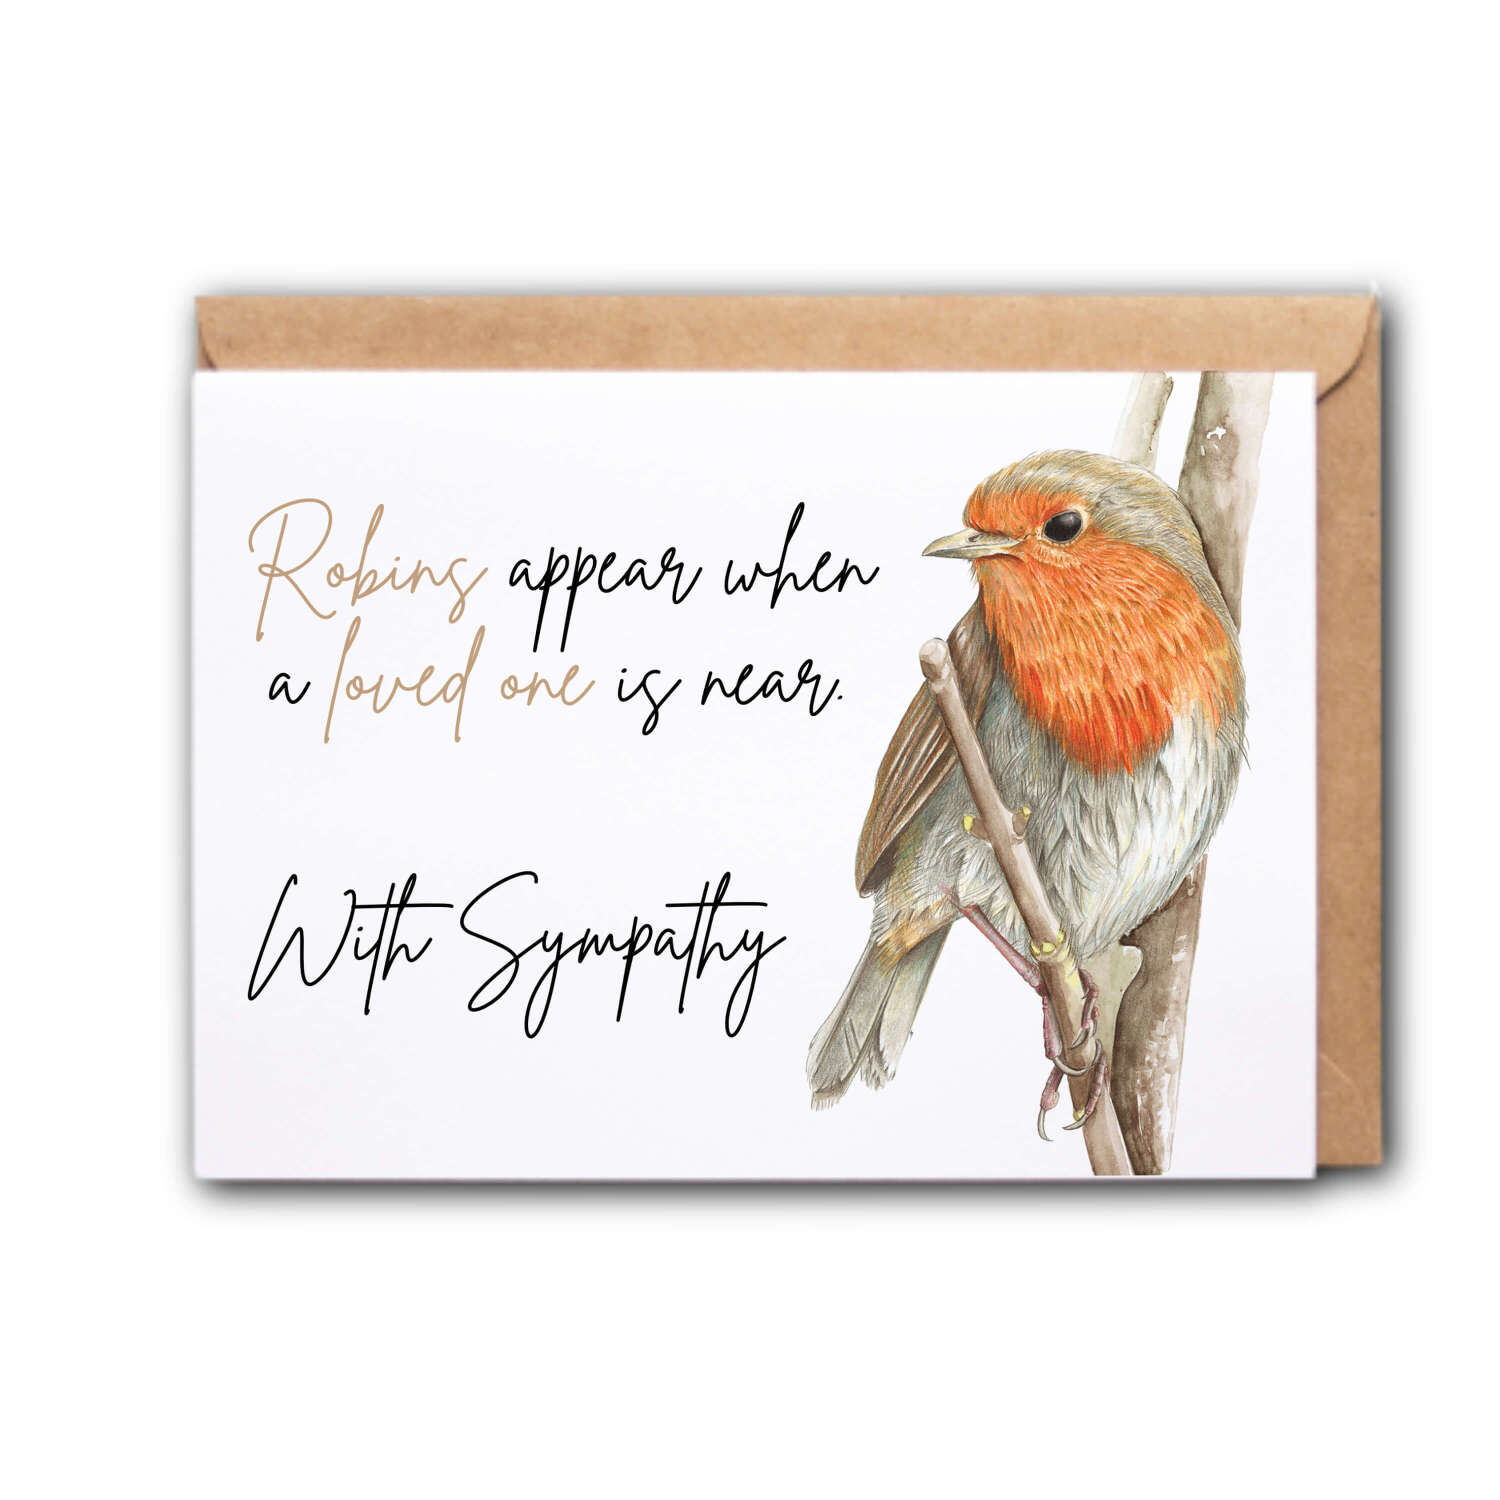 Sympathy Card - Robins Appear When A Loved One Is Near - Small - Approx. A6 | 105mm x 14.8mm | 4.1in x 5.8in